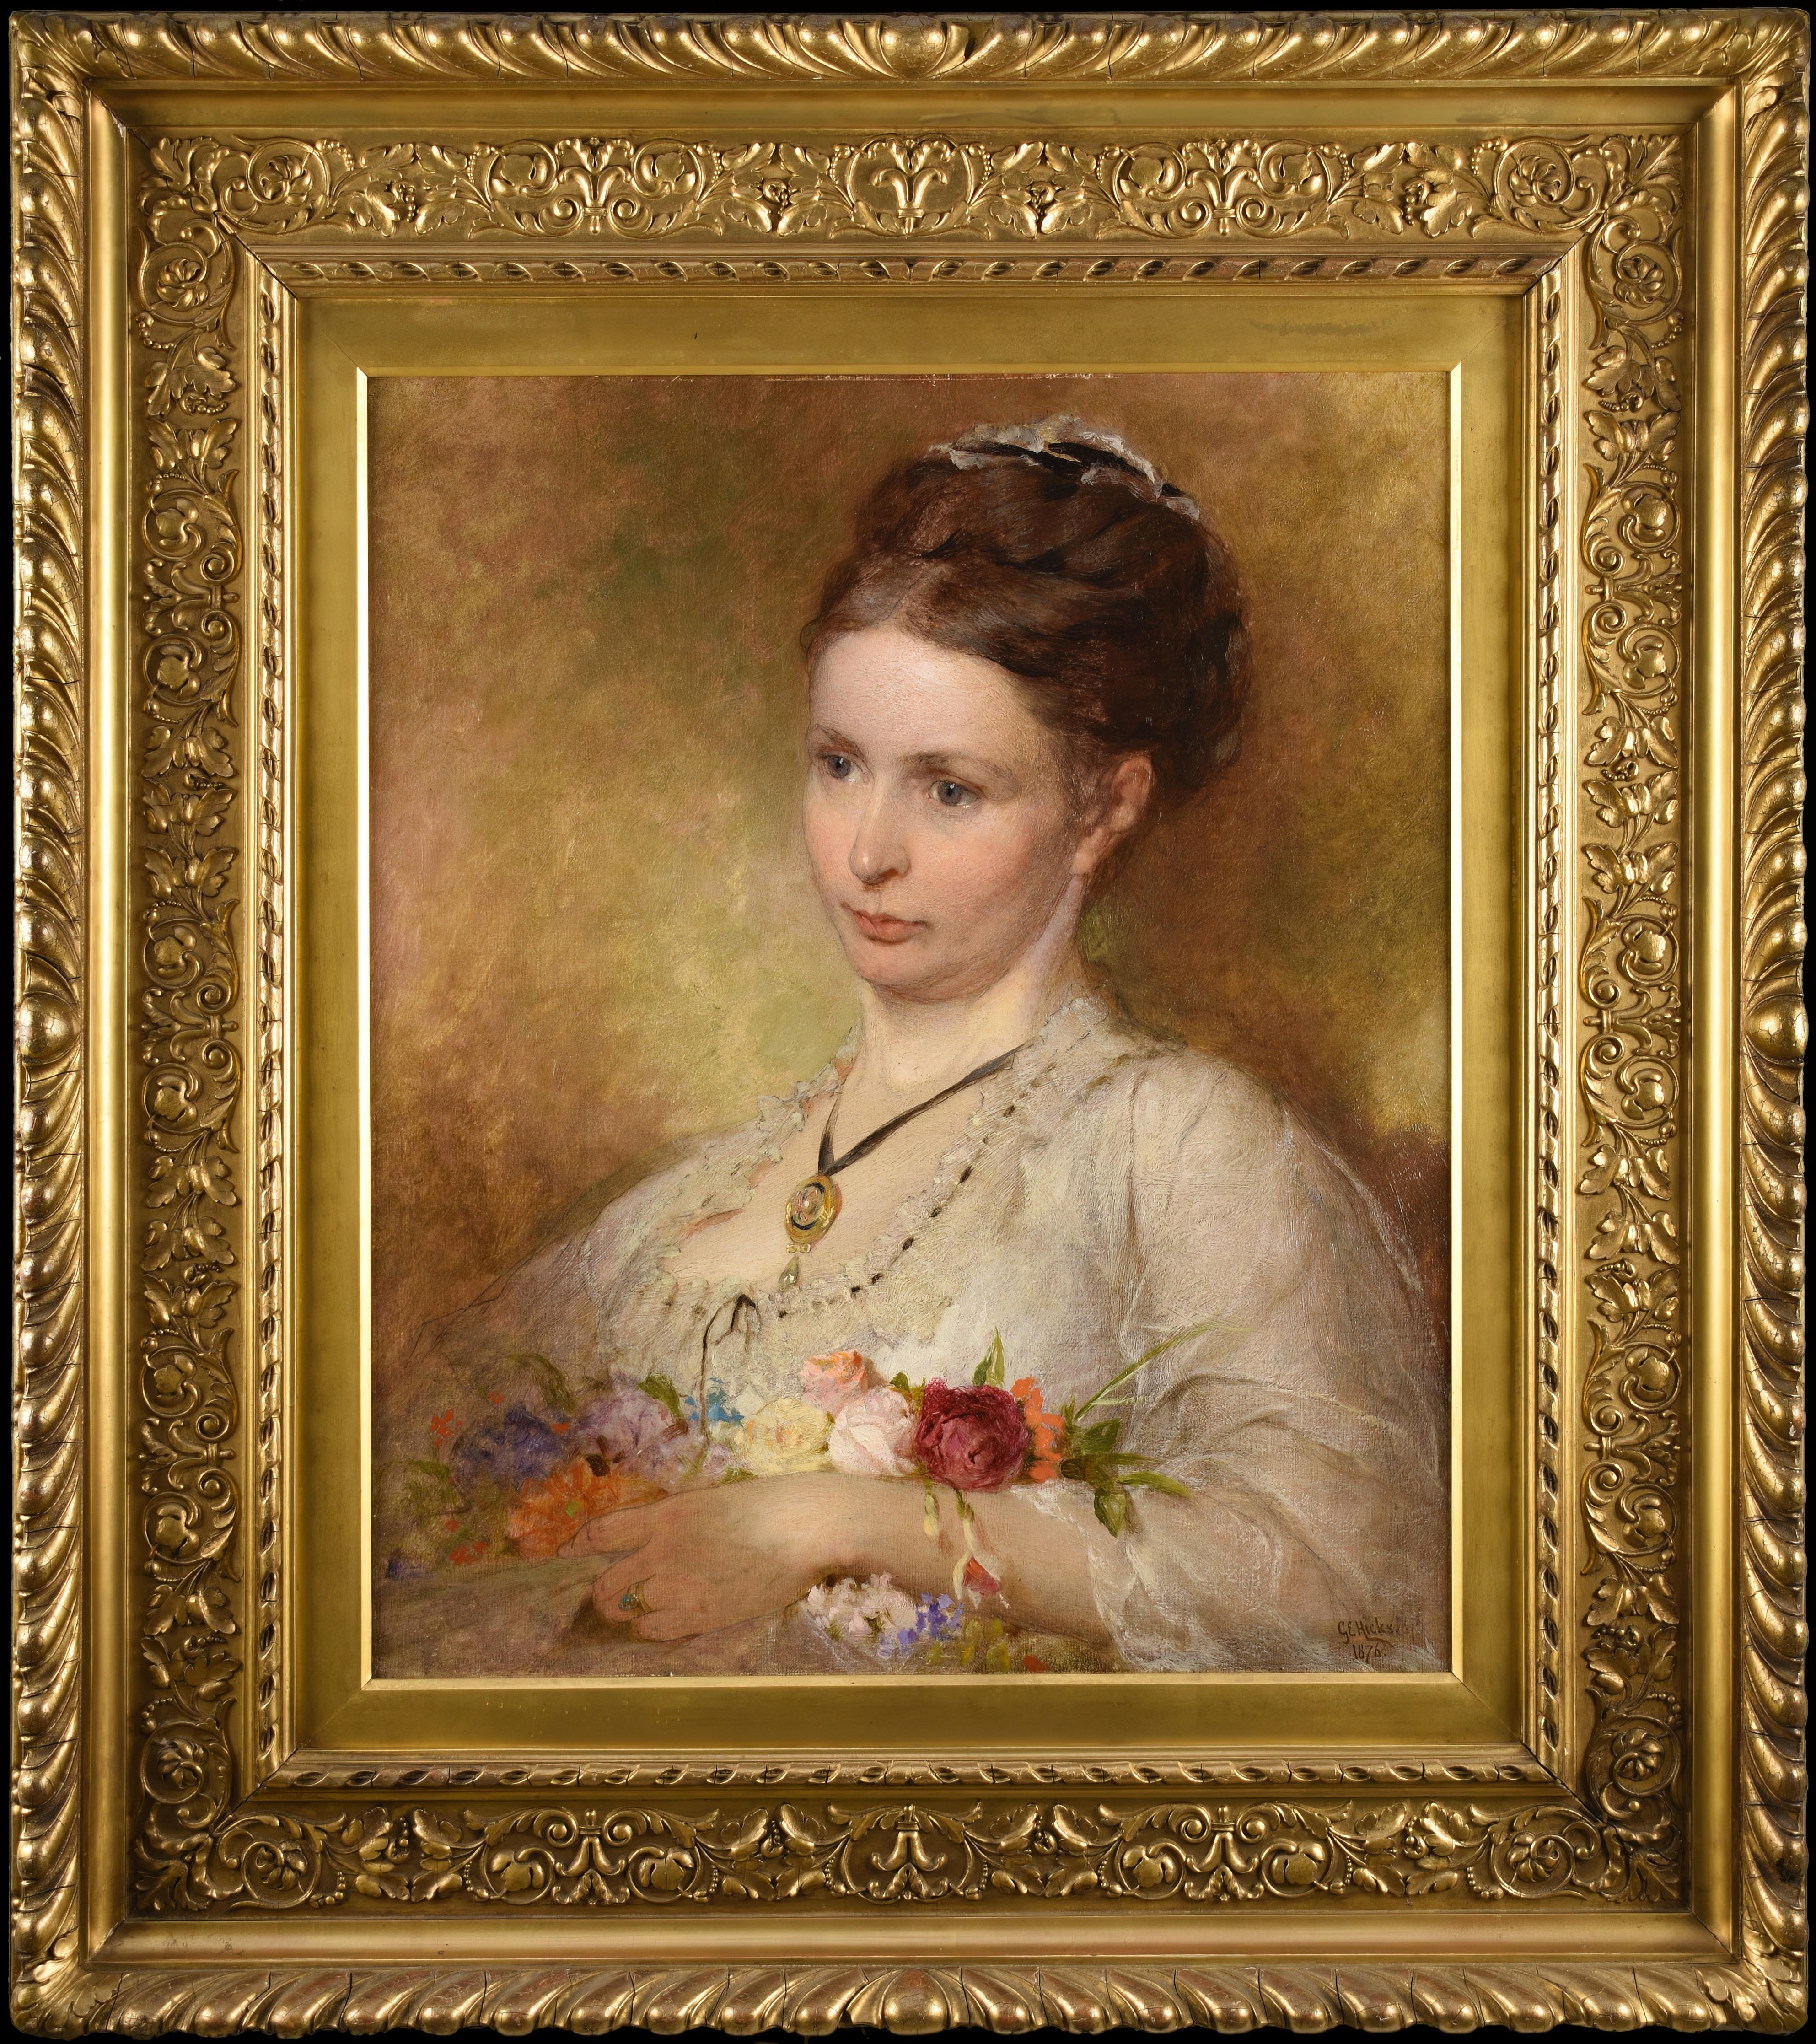 English portrait of an Elegant Lady with important frame "Mrs W. Butt"